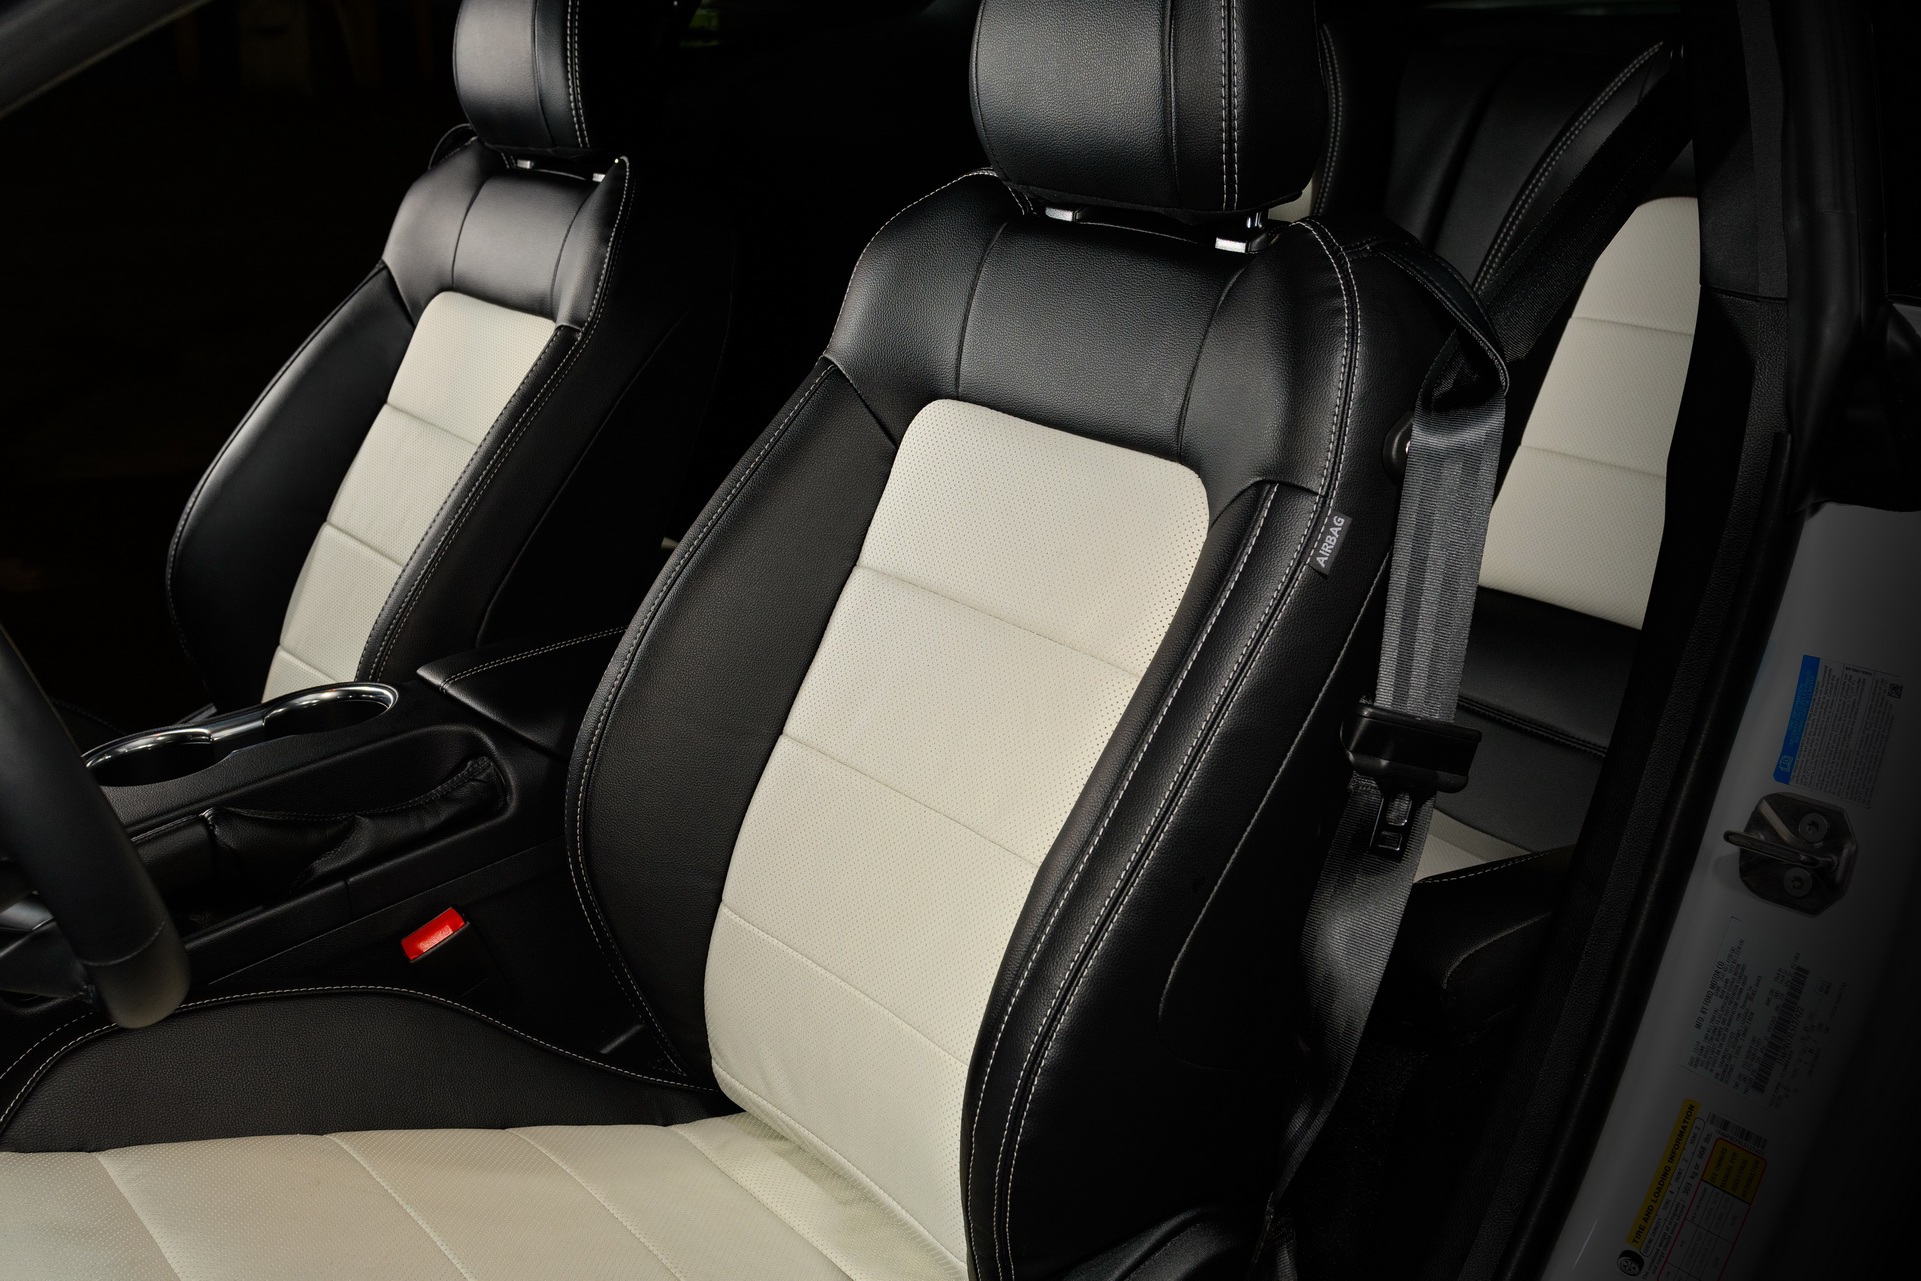 2022 Ford Mustang Ice White Appearance Package Interior Seats Wallpapers #21 of 24